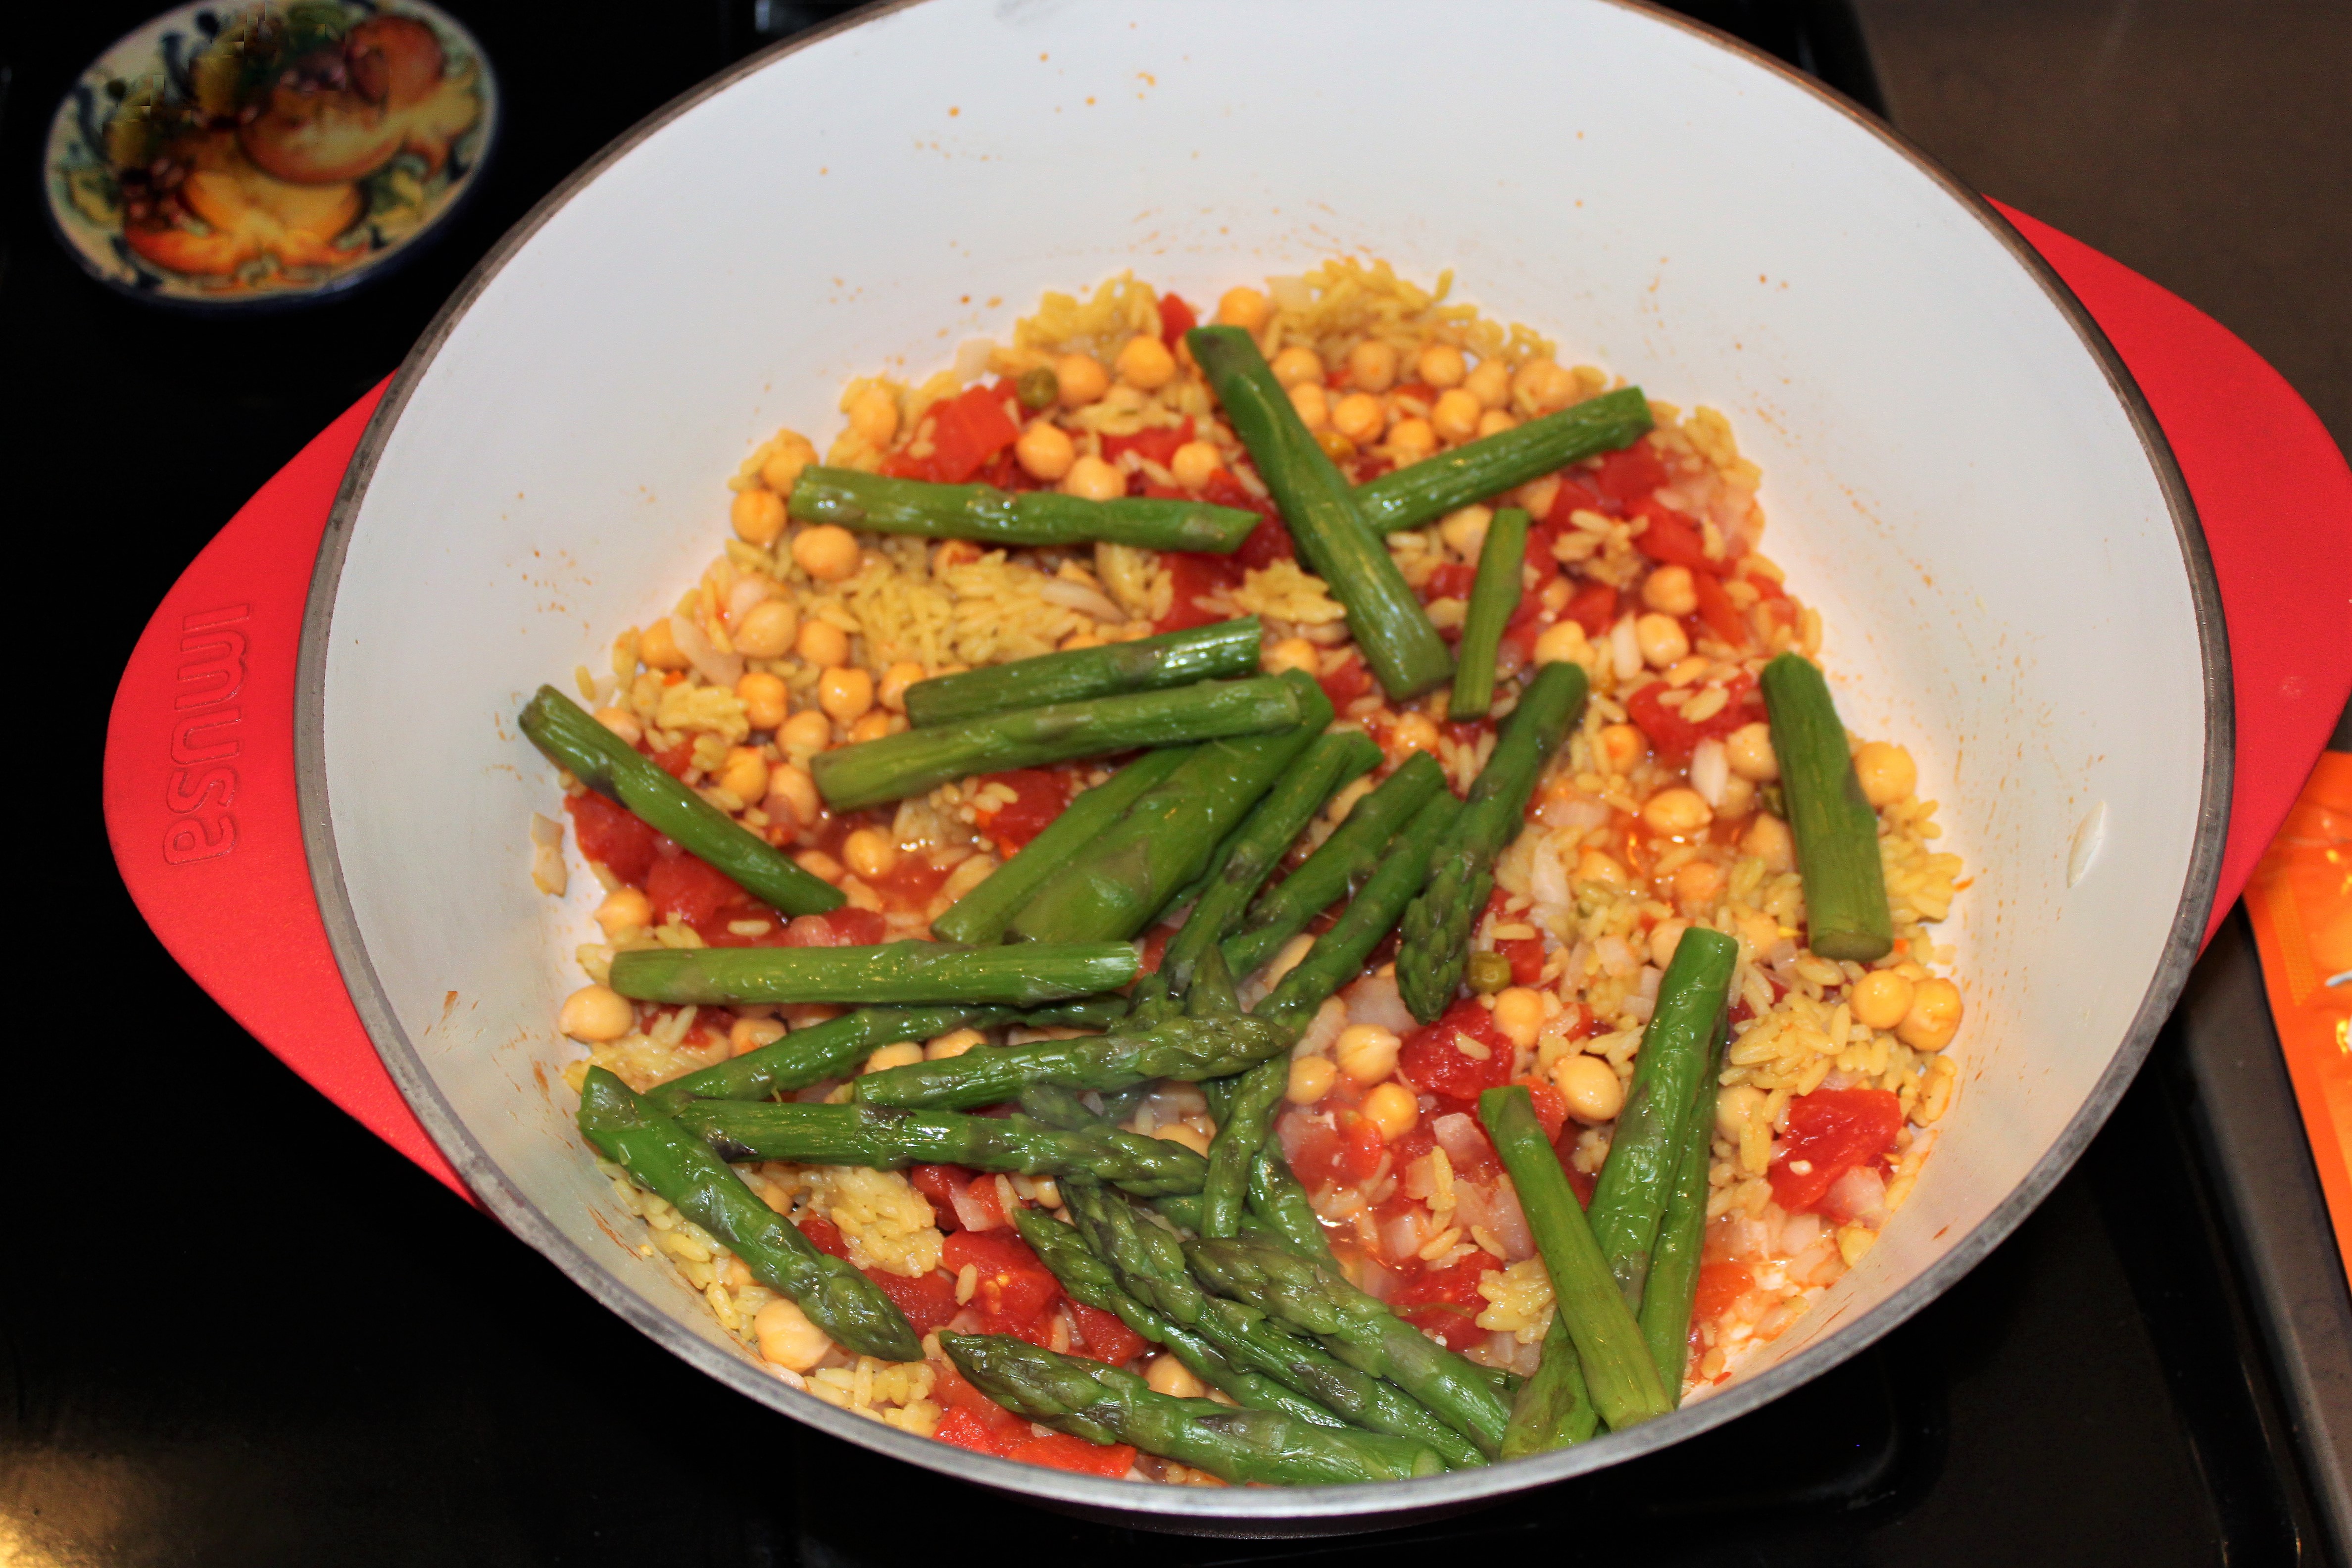 easy recipes using uncle bens with chickpeas, asparagus, and rice. Kid friendly meal, easy, week day, under 20 minutes